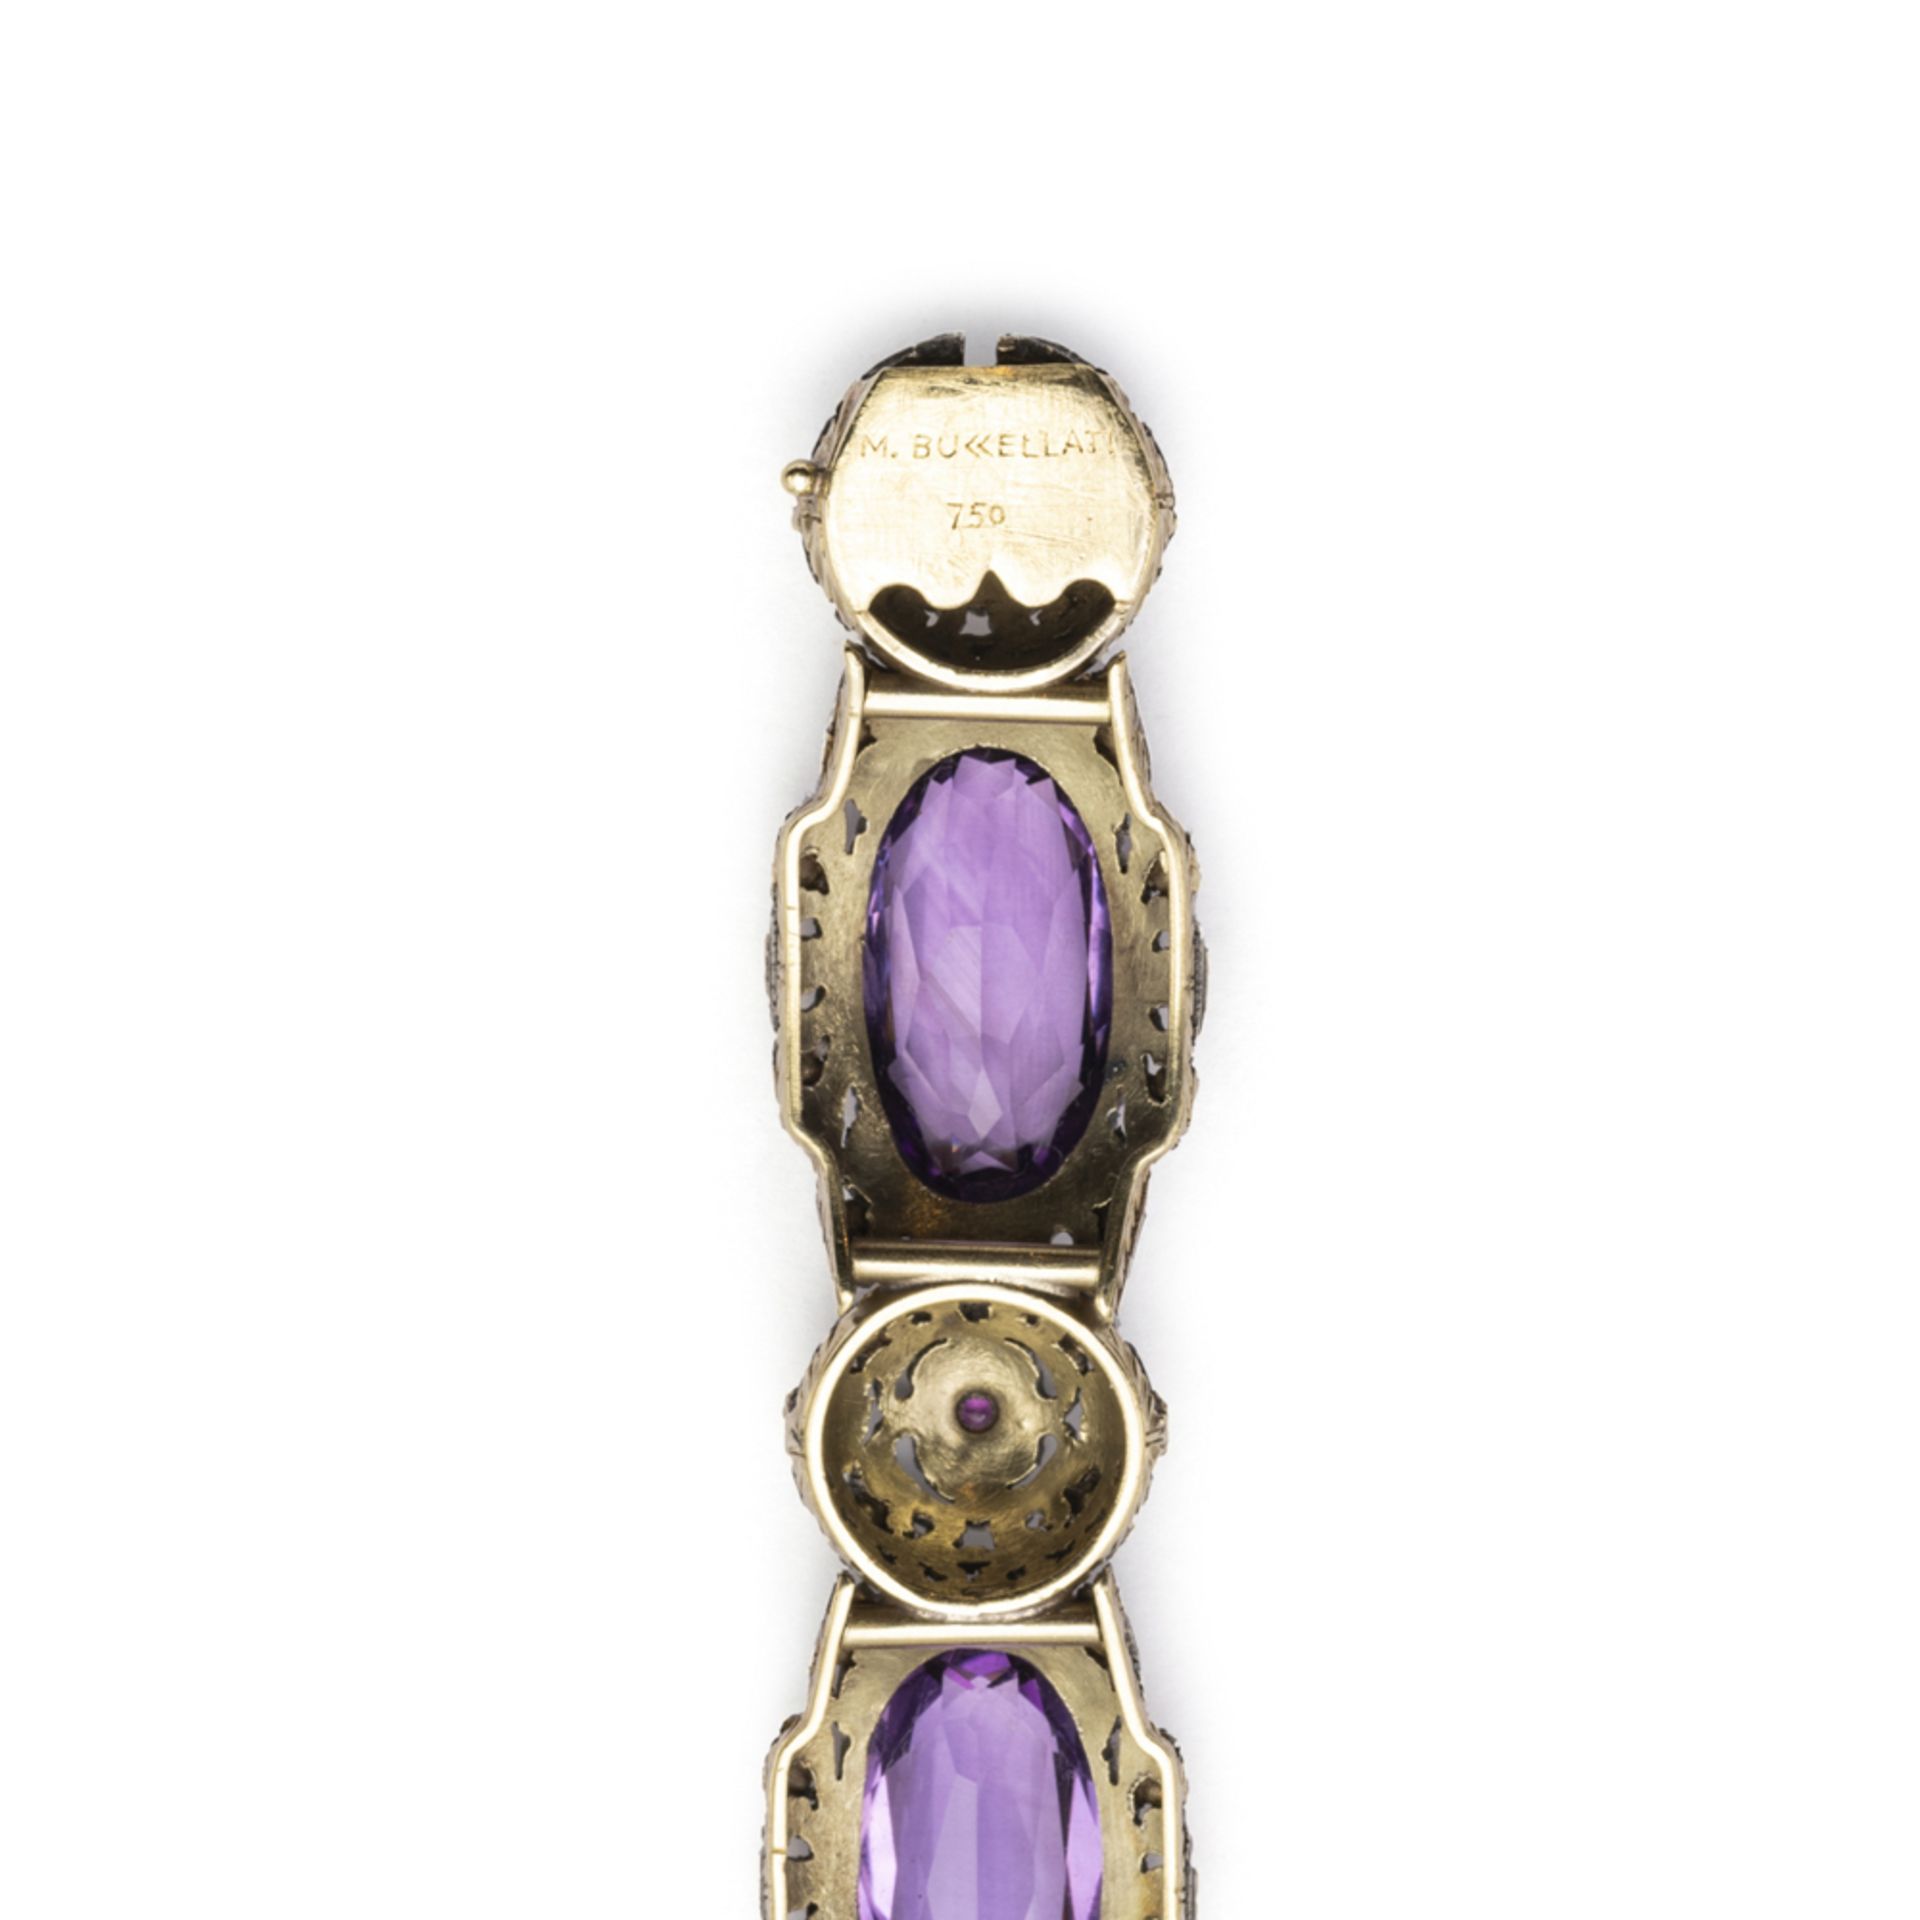 Mario Buccellati, 18kt yellow gold, silver and amethysts bracelet - Image 2 of 2